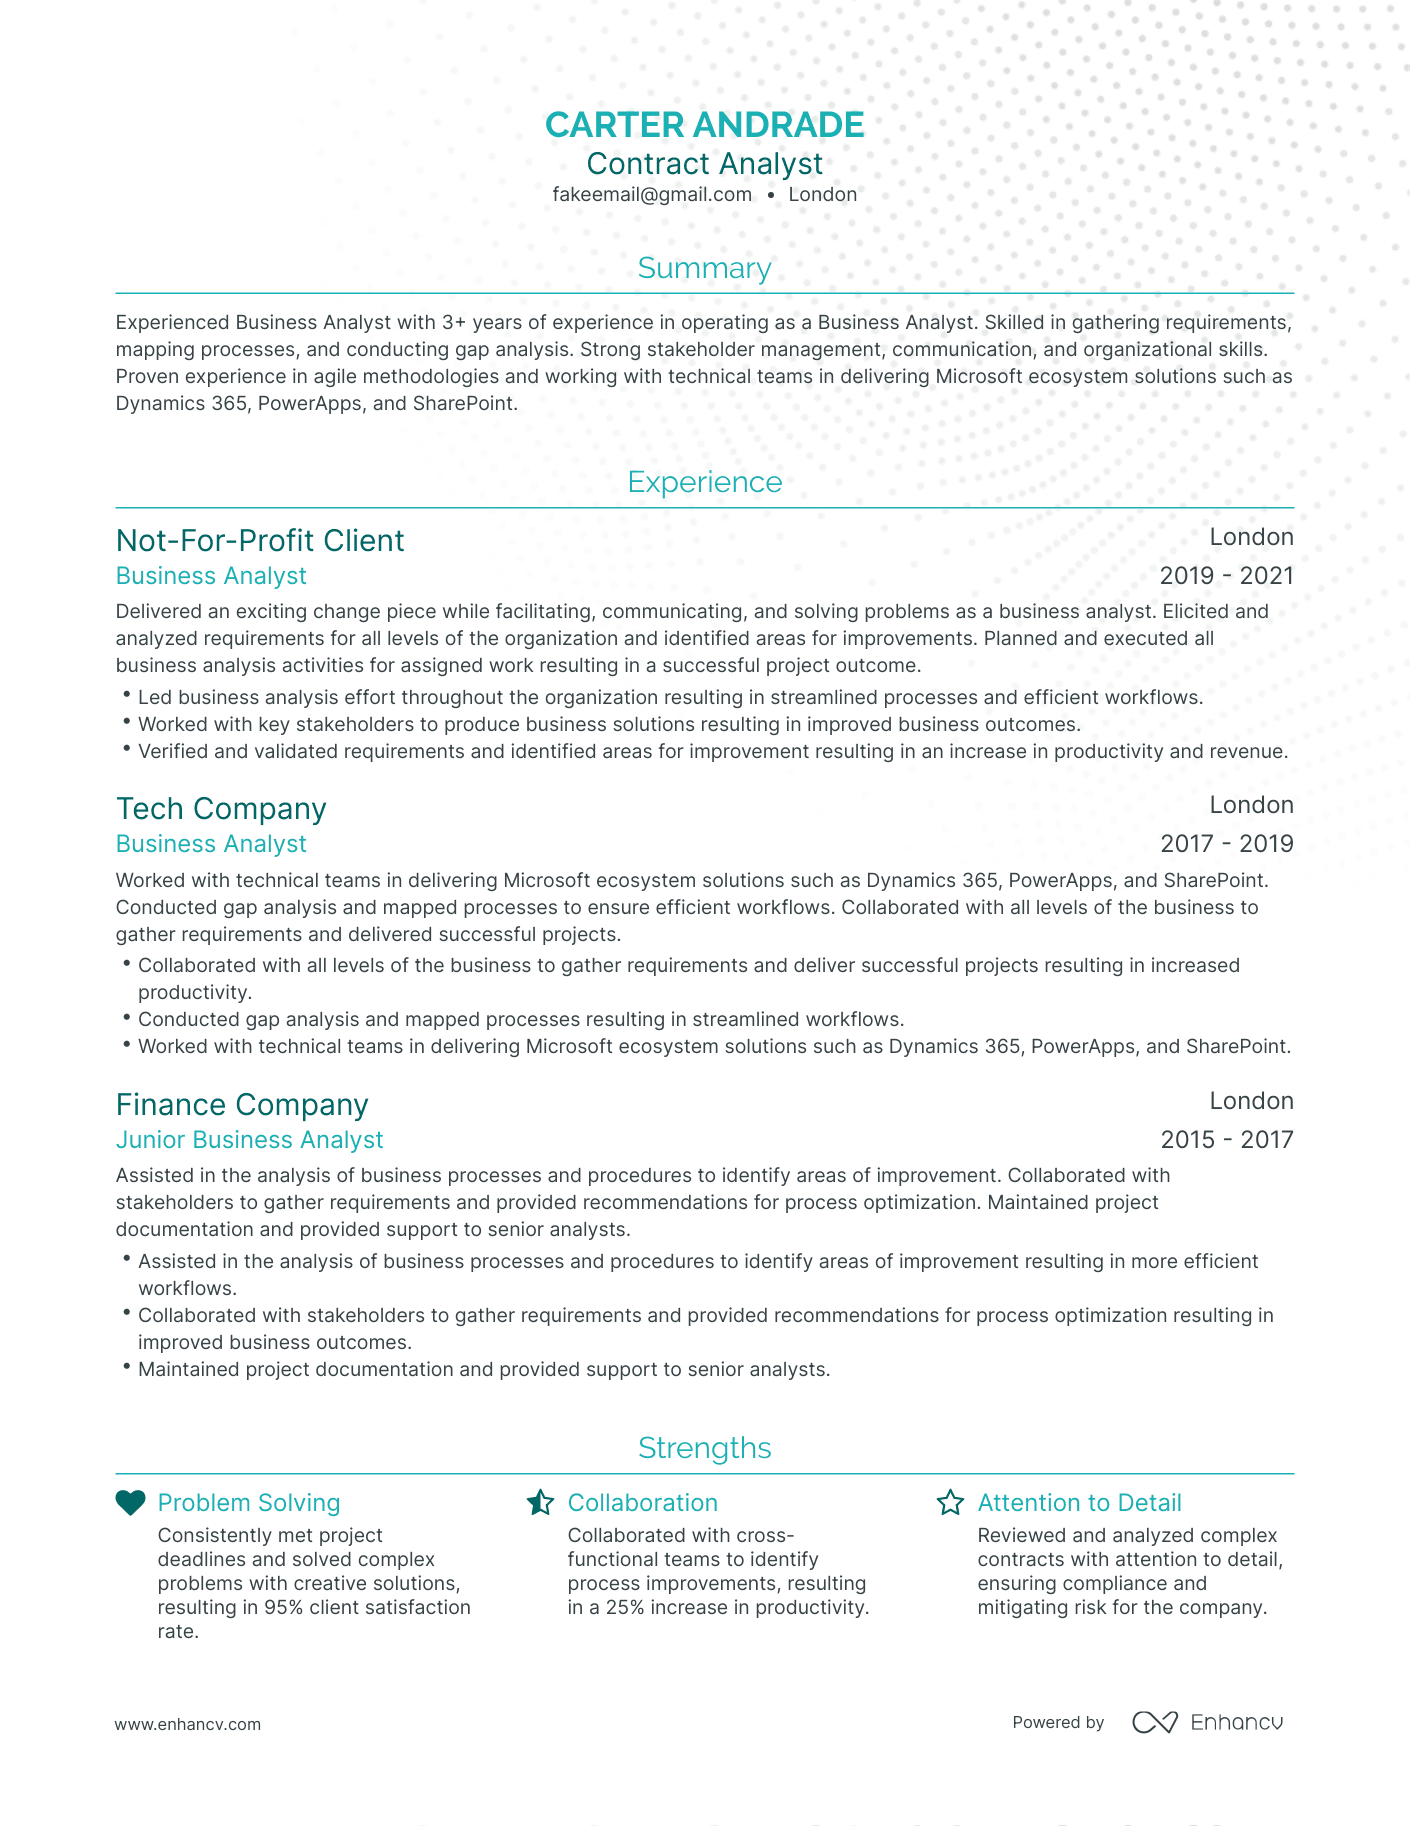 Traditional Contract Analyst Resume Template